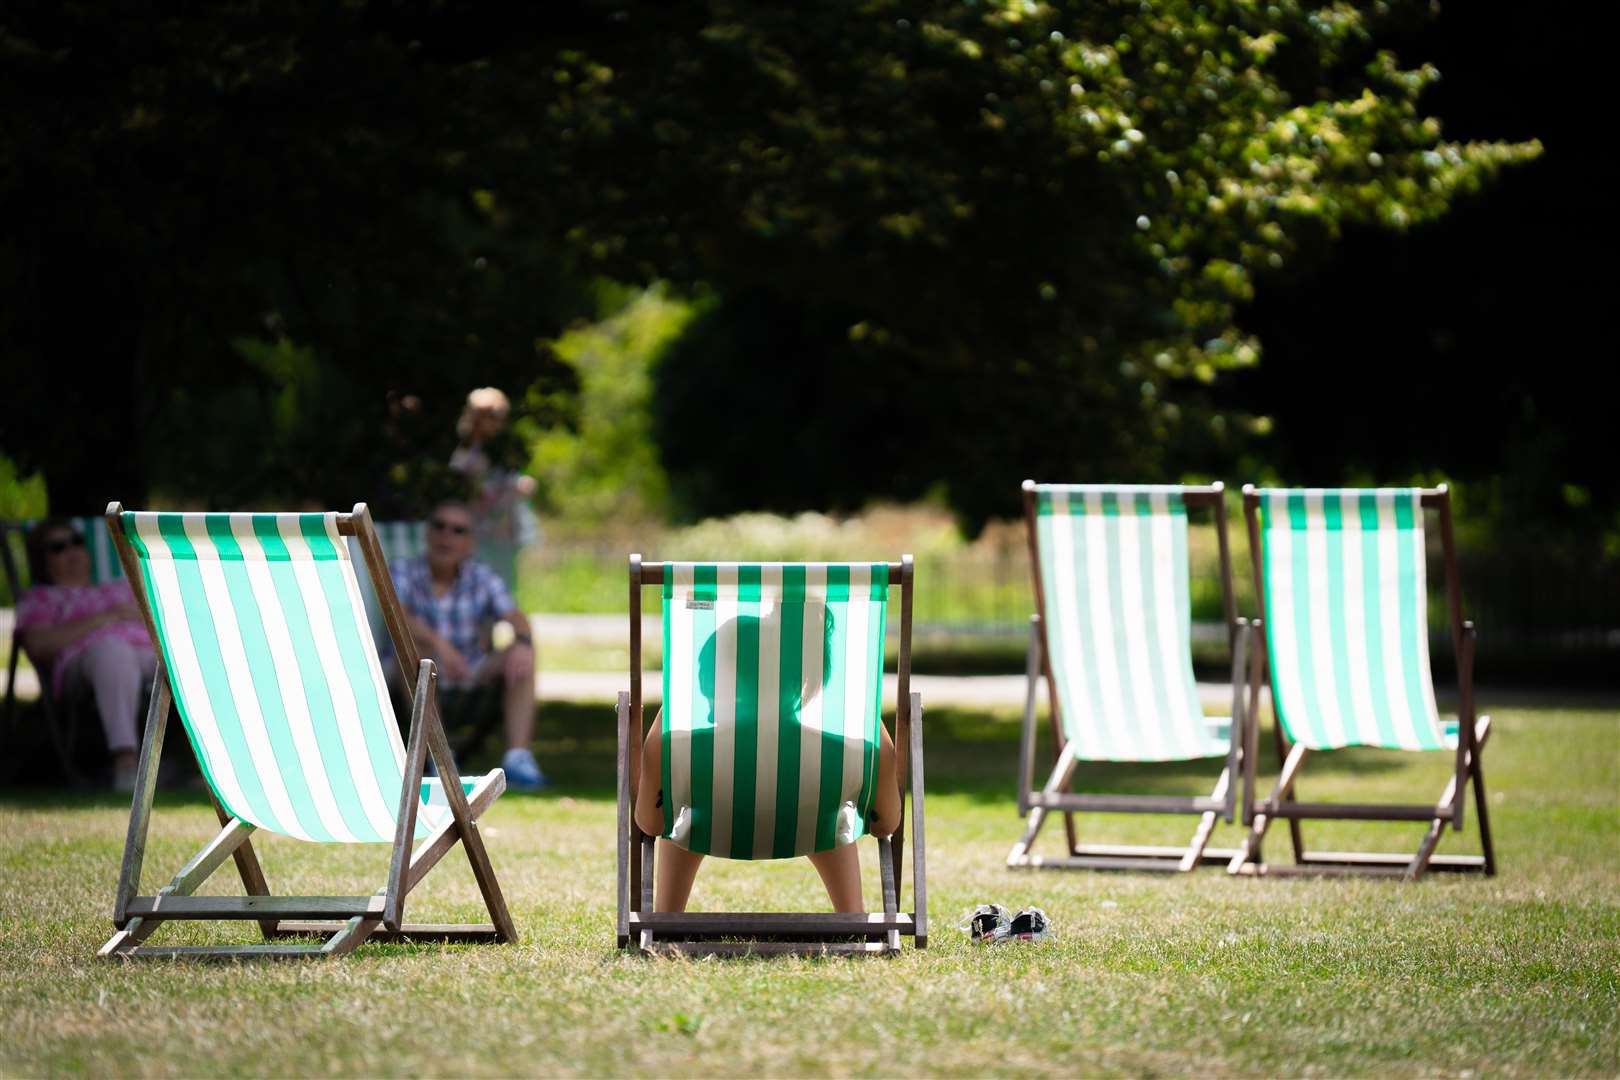 A person sits in a deckchair in St James’ Park in London (James Manning/PA)